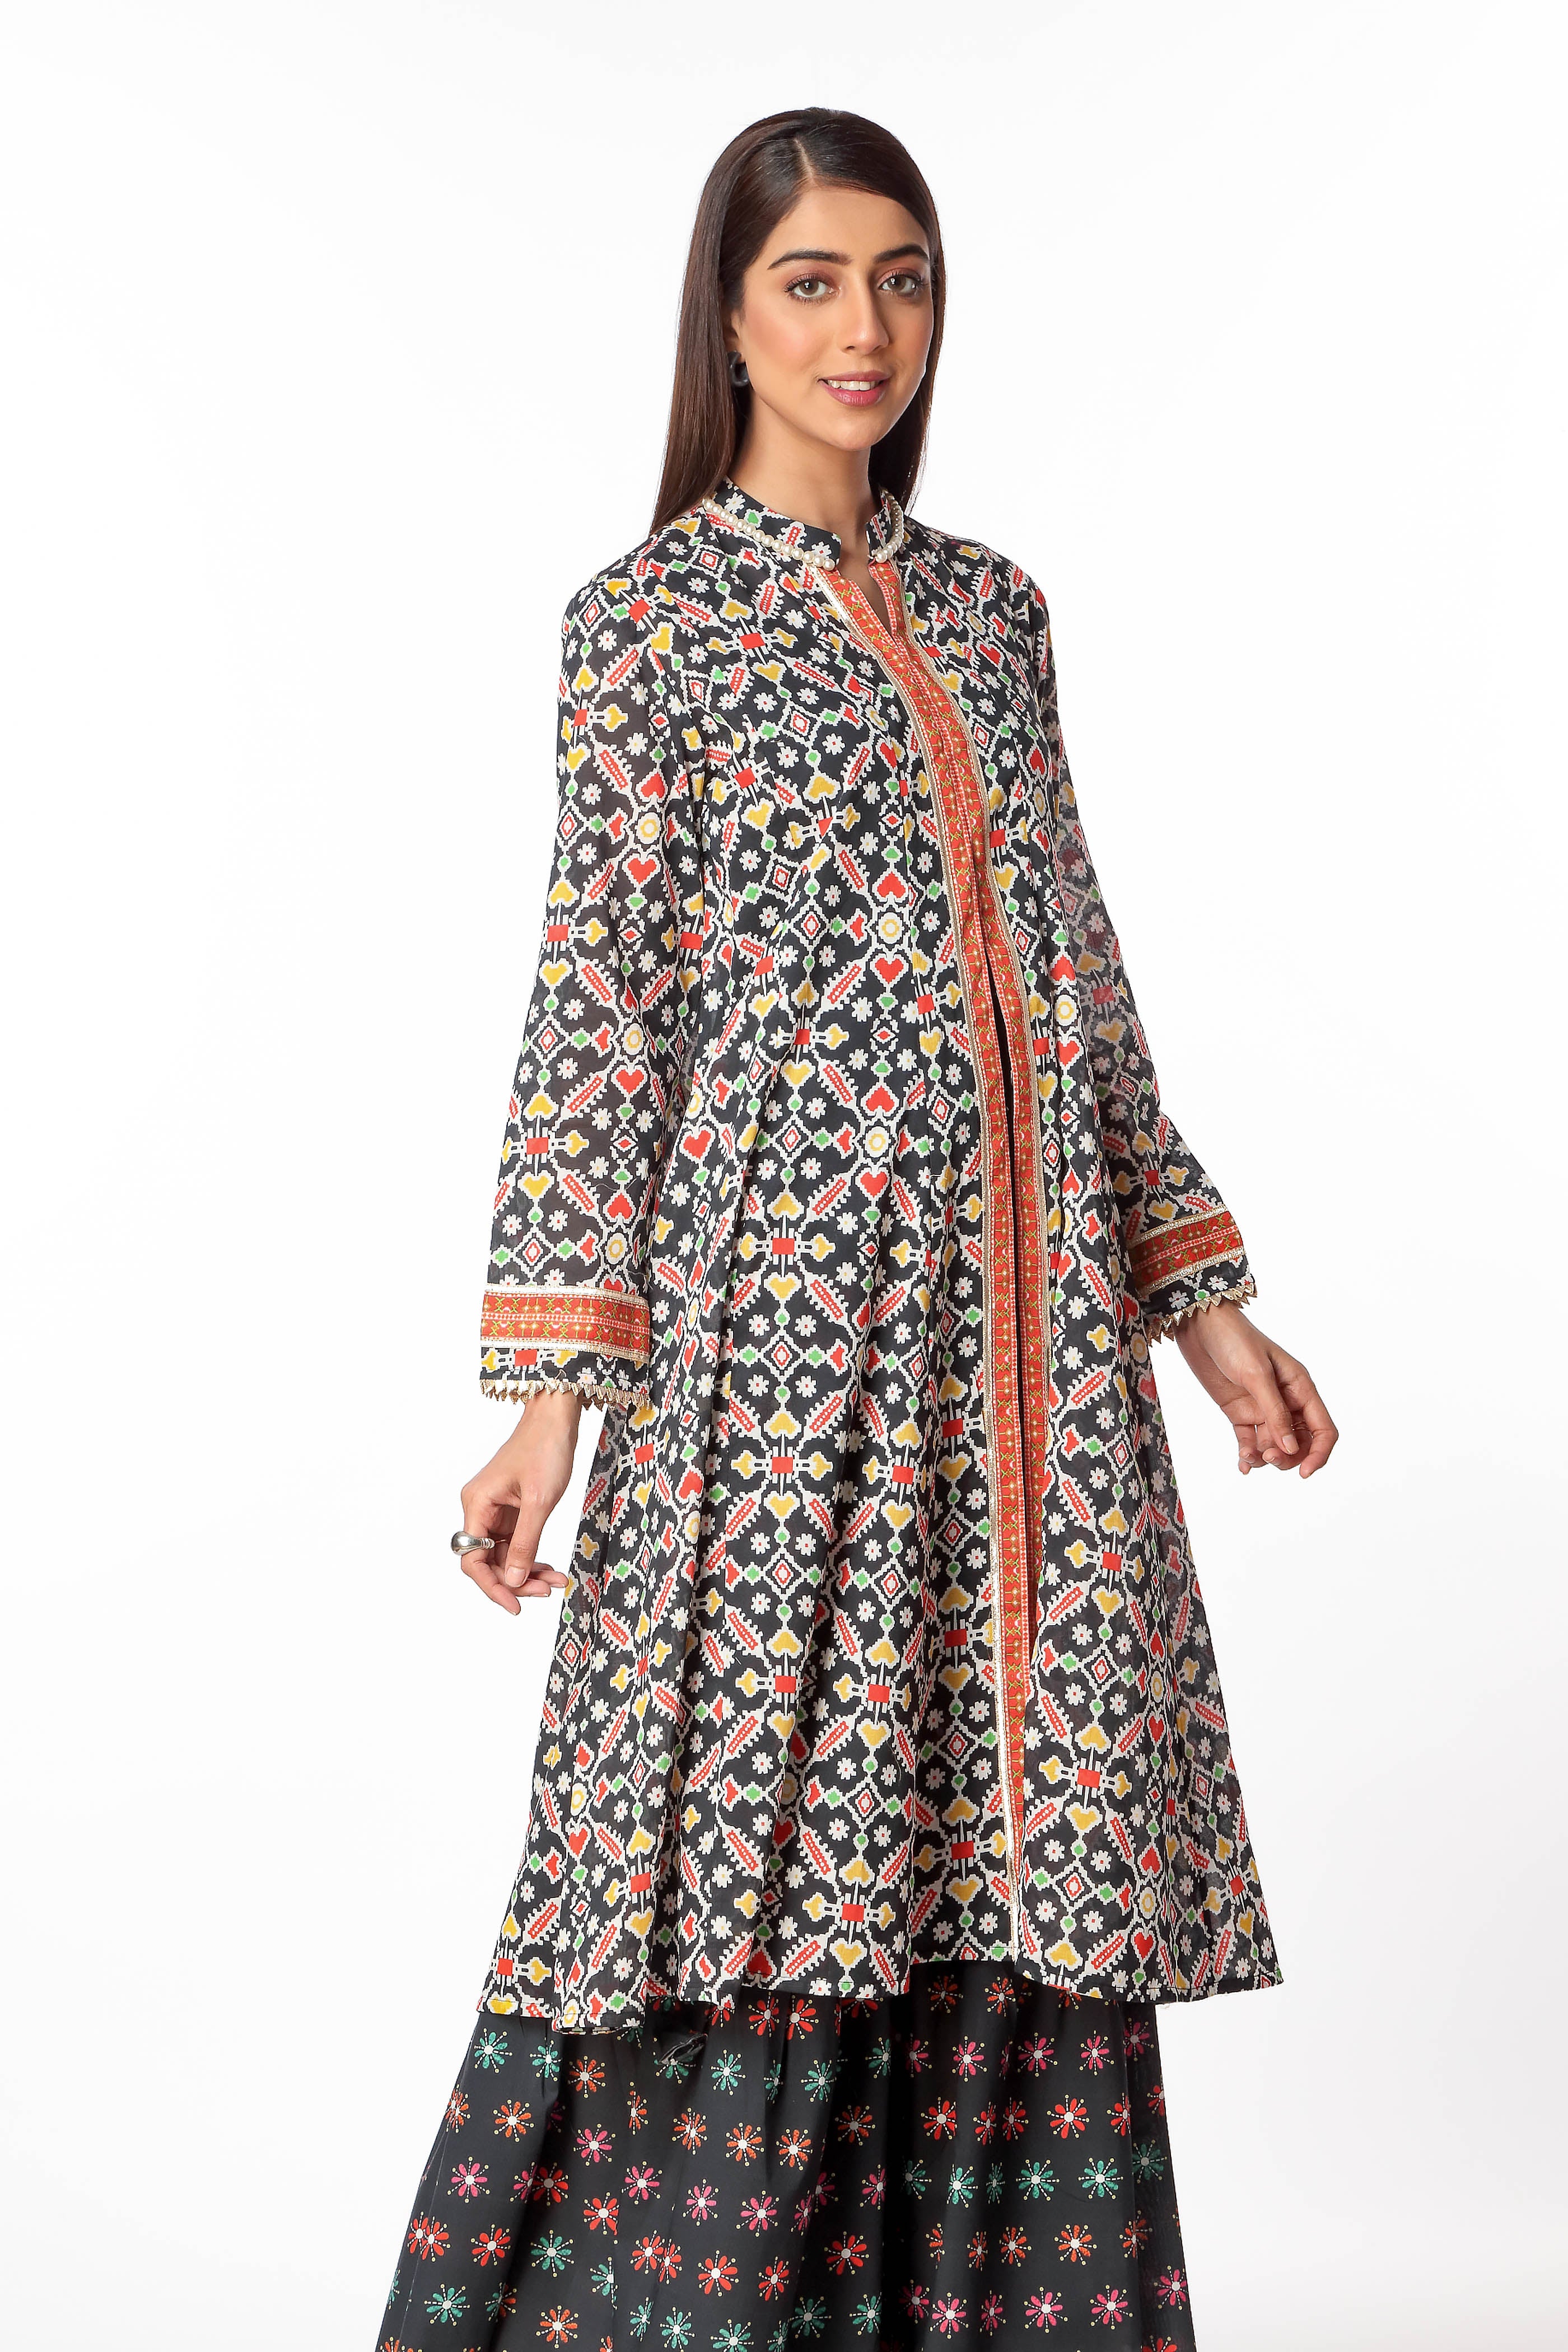 Patola Jaal in Multi coloured Printed Lawn fabric 2